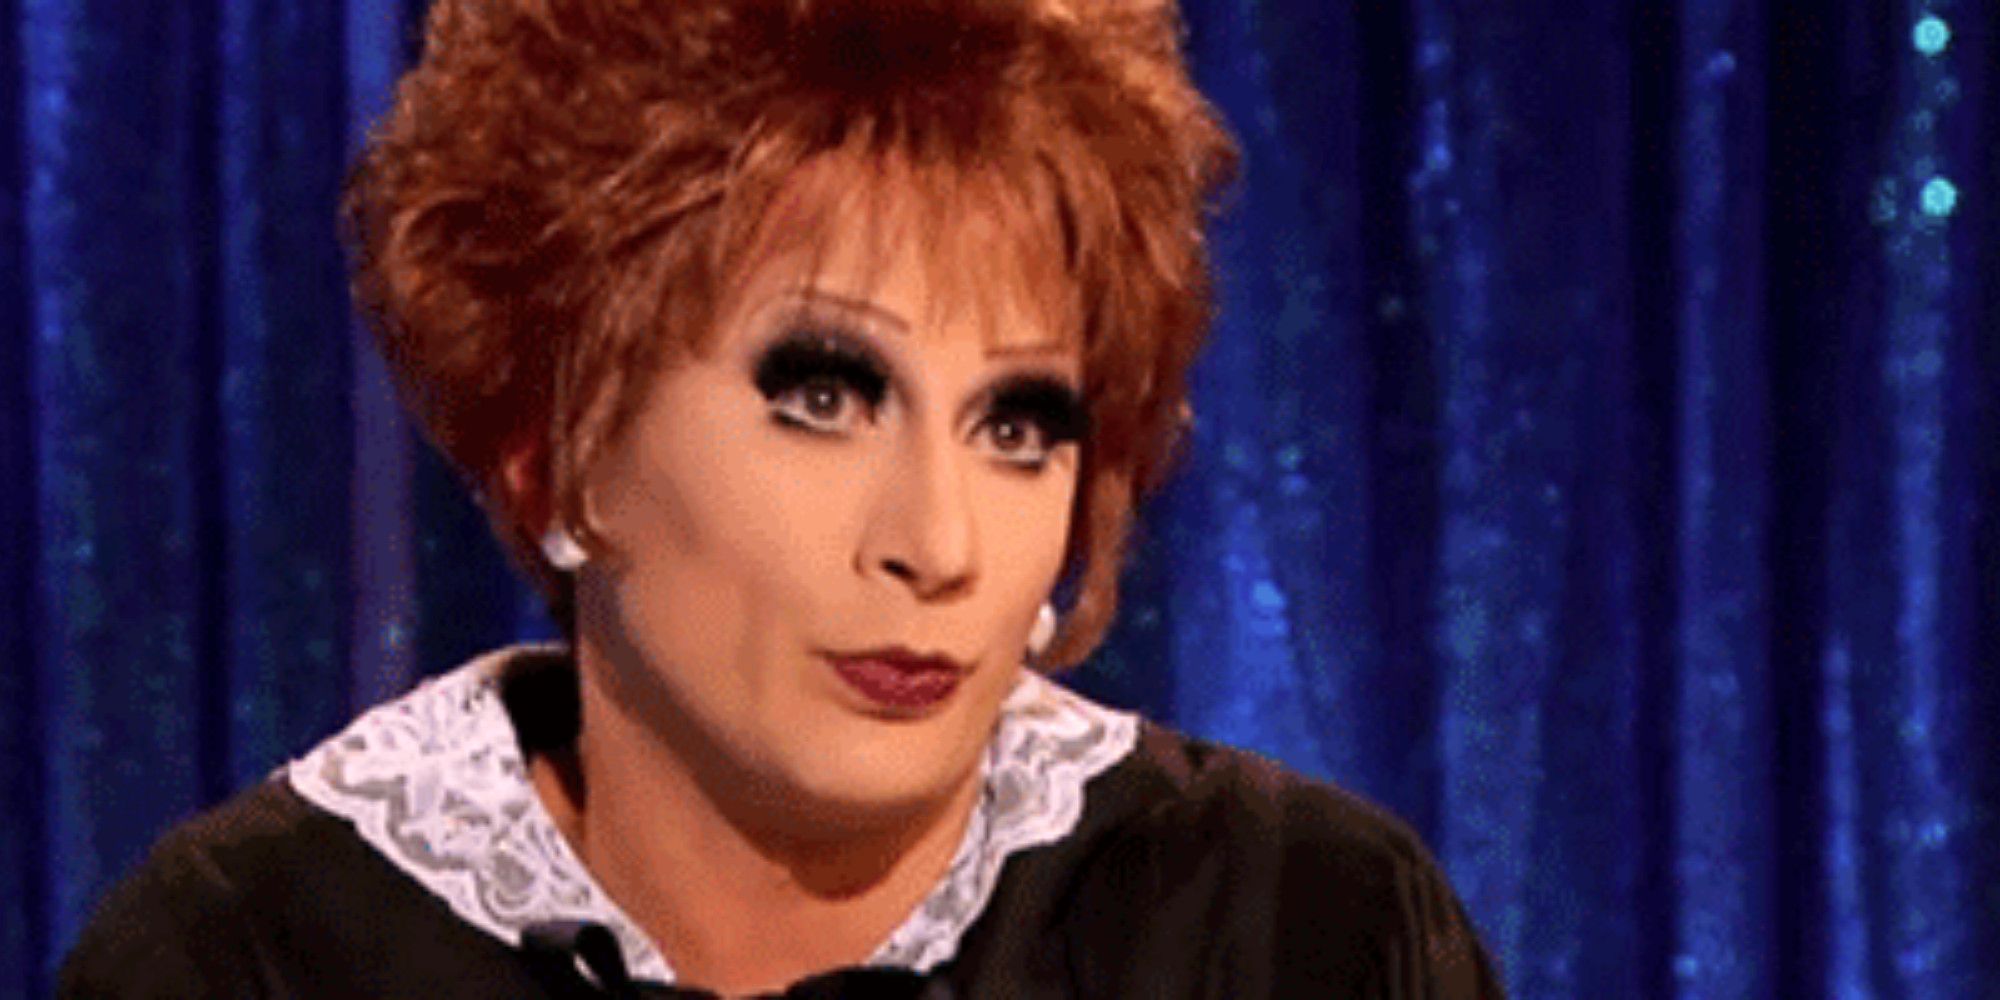 Bianca Del Rio portrays Judge Judy in the Snatch Game on RuPaul's Drag Race.